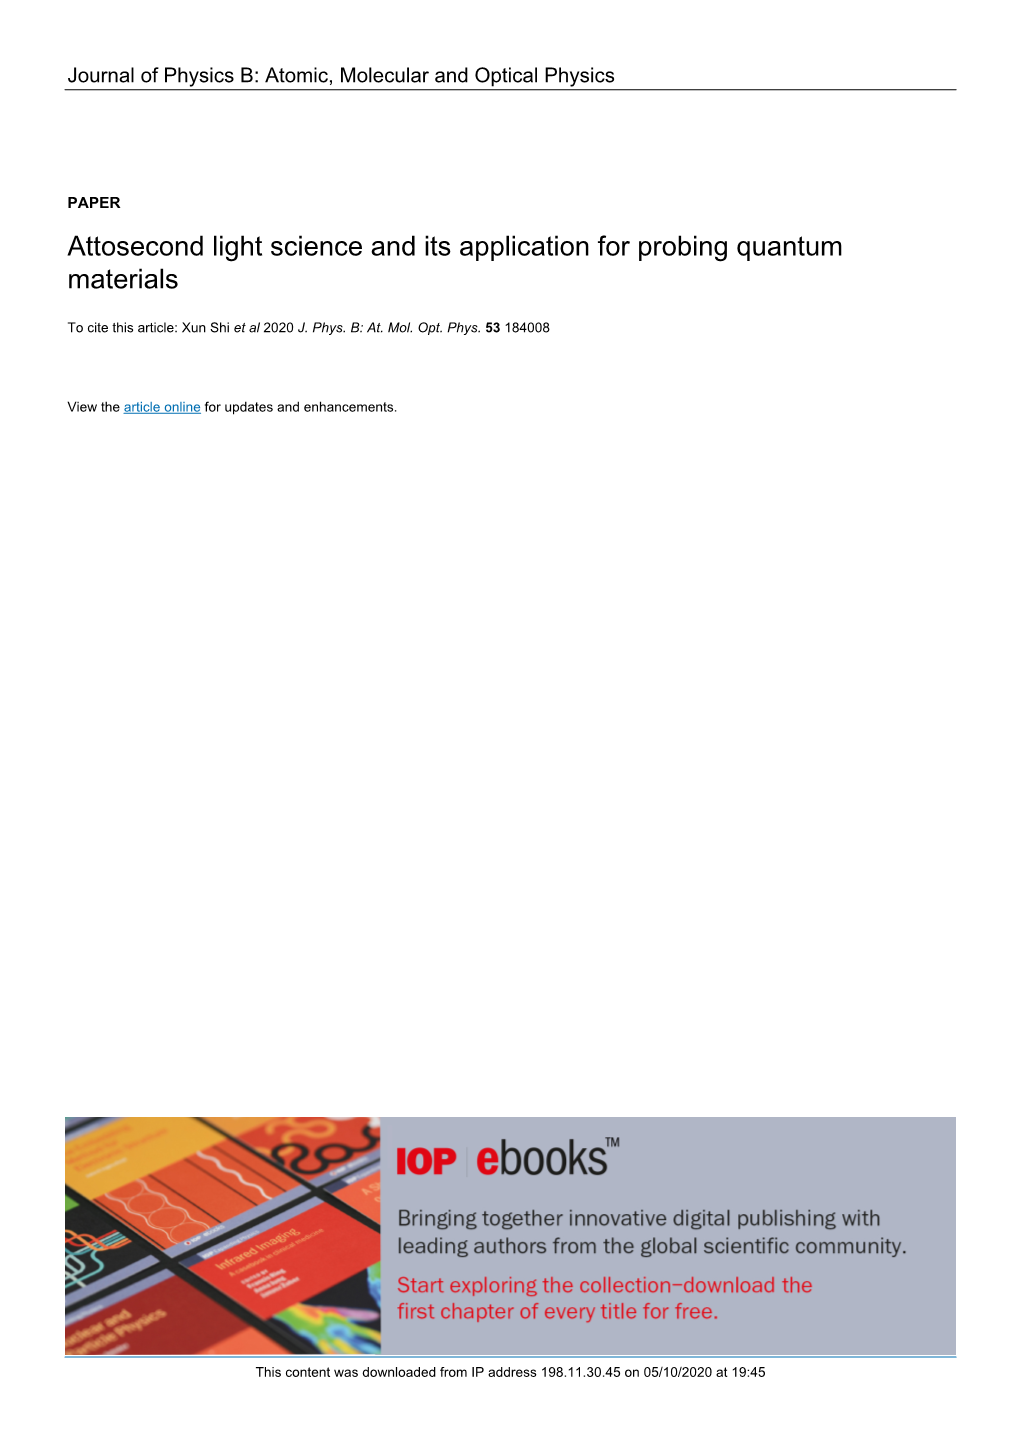 Attosecond Light Science and Its Application for Probing Quantum Materials